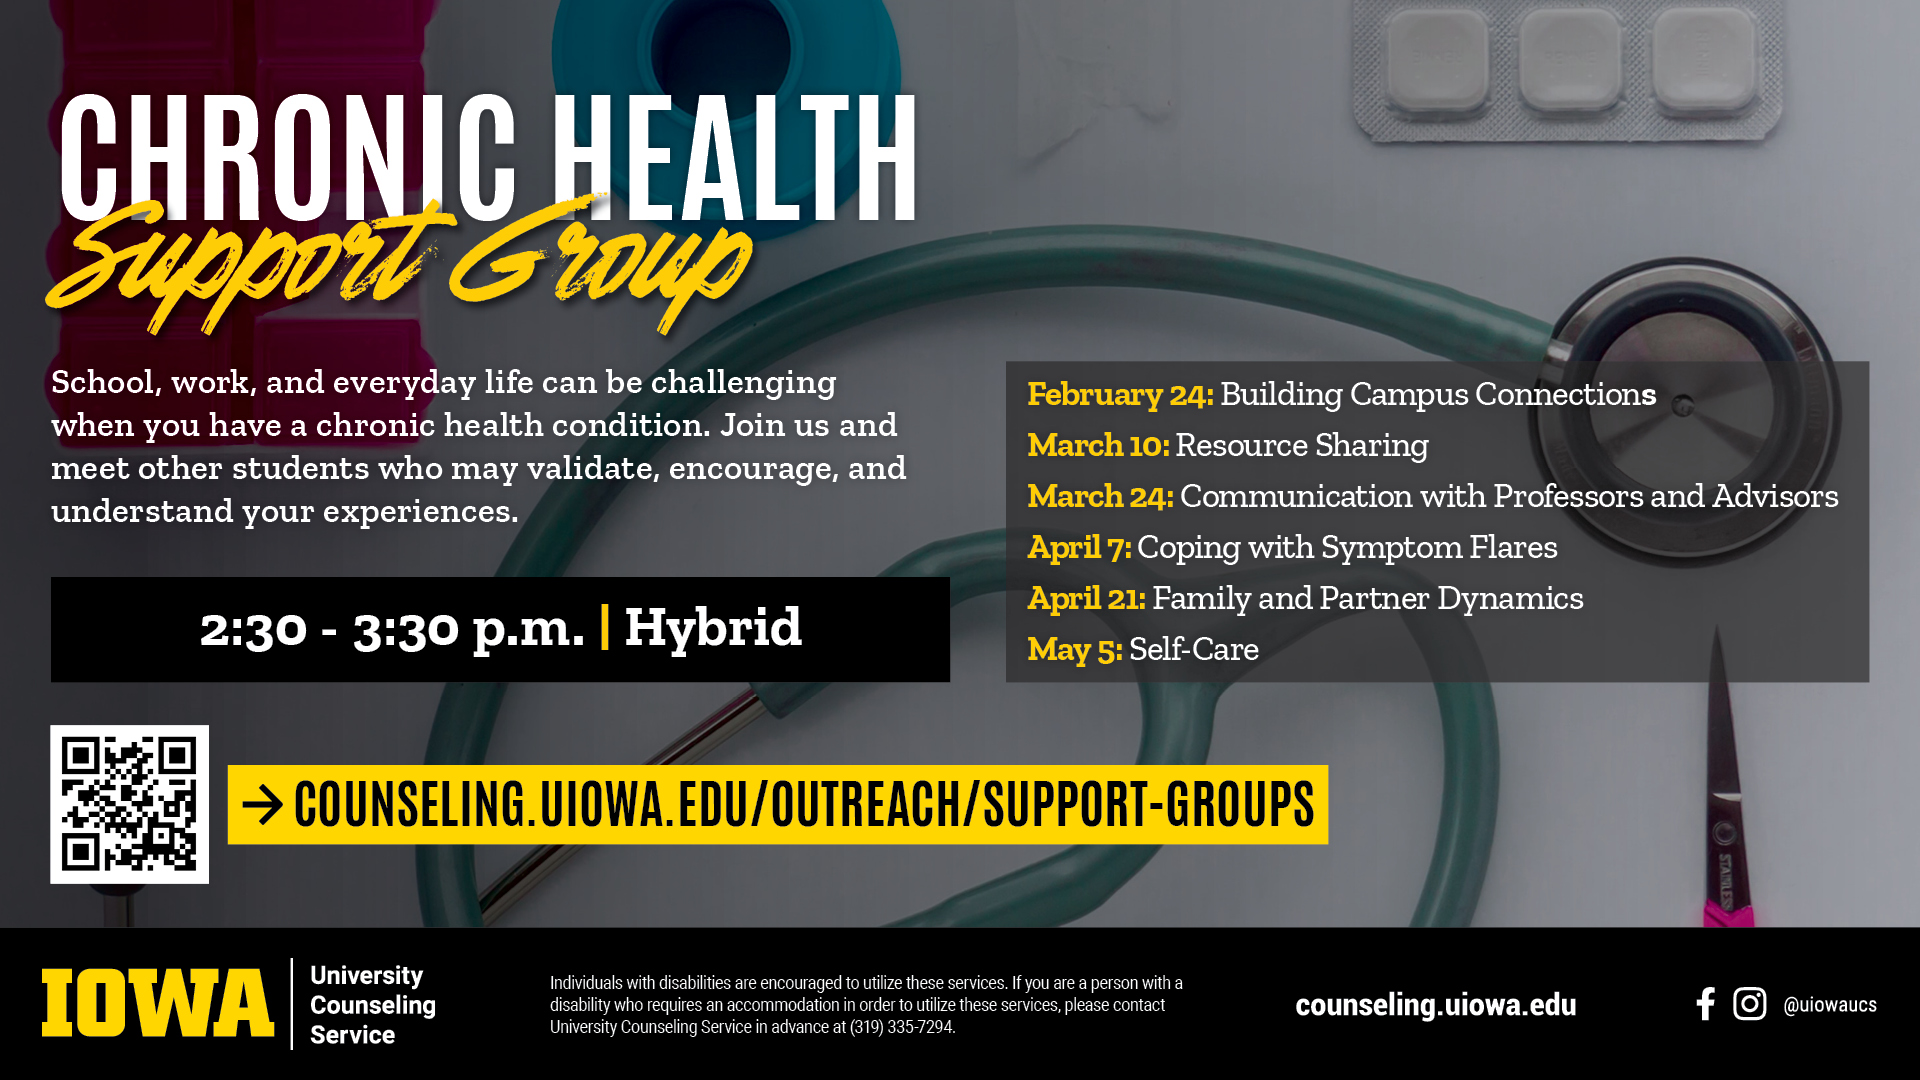 Chronic Health Support Group 2:30-3:30pm Hybrid counseling.uiowa.edu/outreach/support-groups